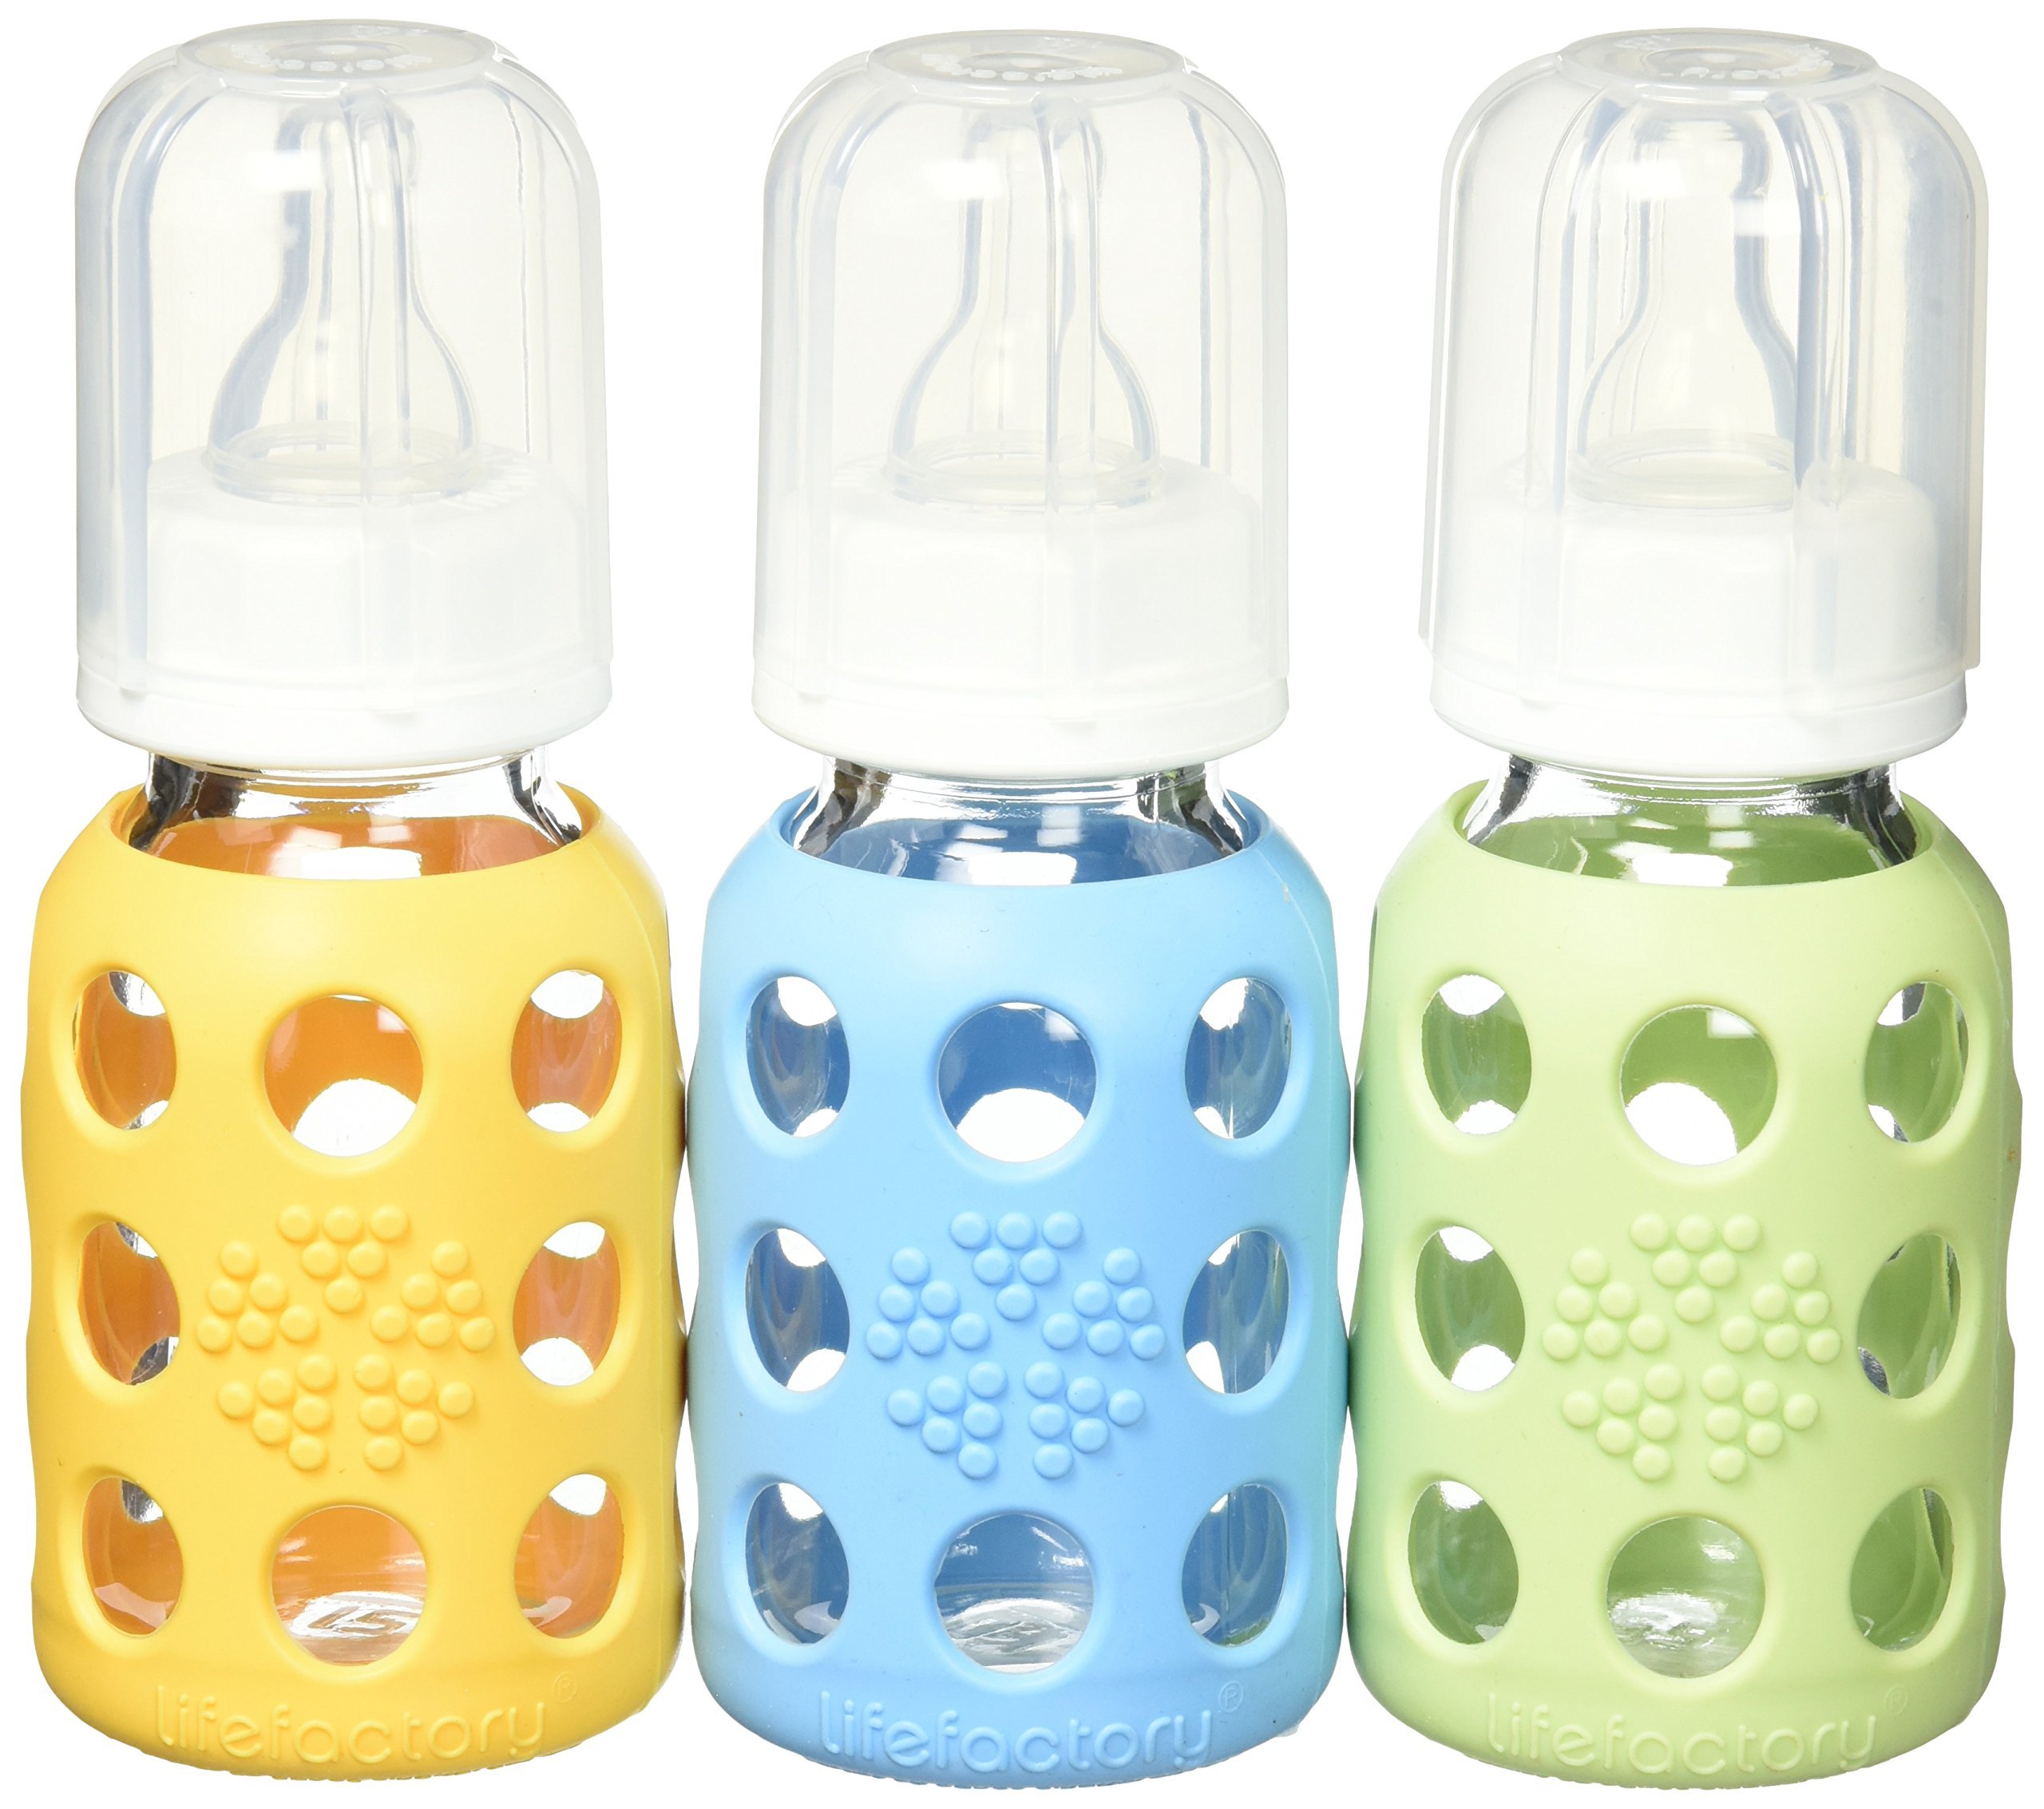 Lifefactory Glass Baby Bottle with Silicone Sleeve 4 Ounce